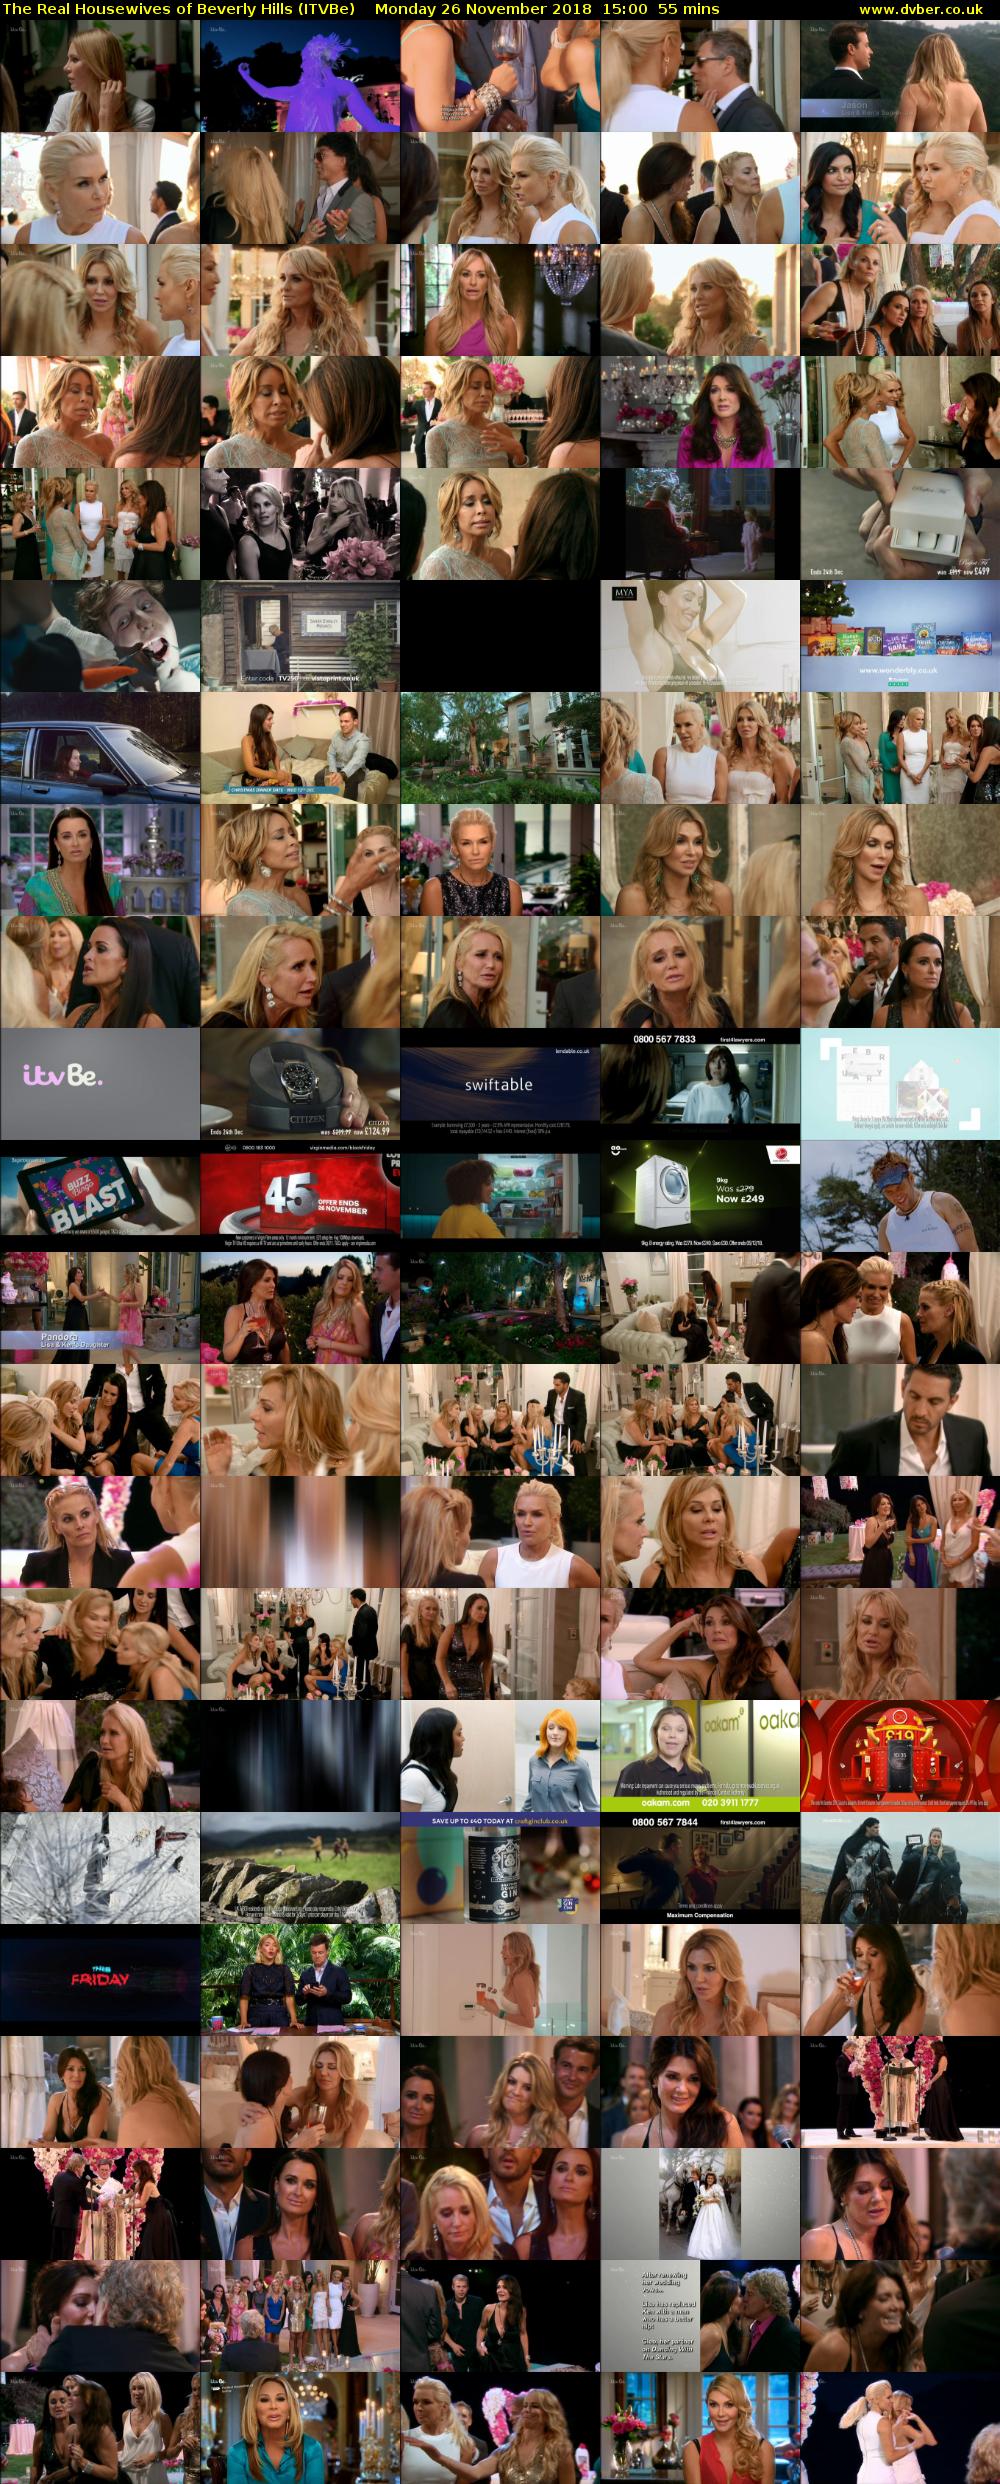 The Real Housewives of Beverly Hills (ITVBe) Monday 26 November 2018 15:00 - 15:55